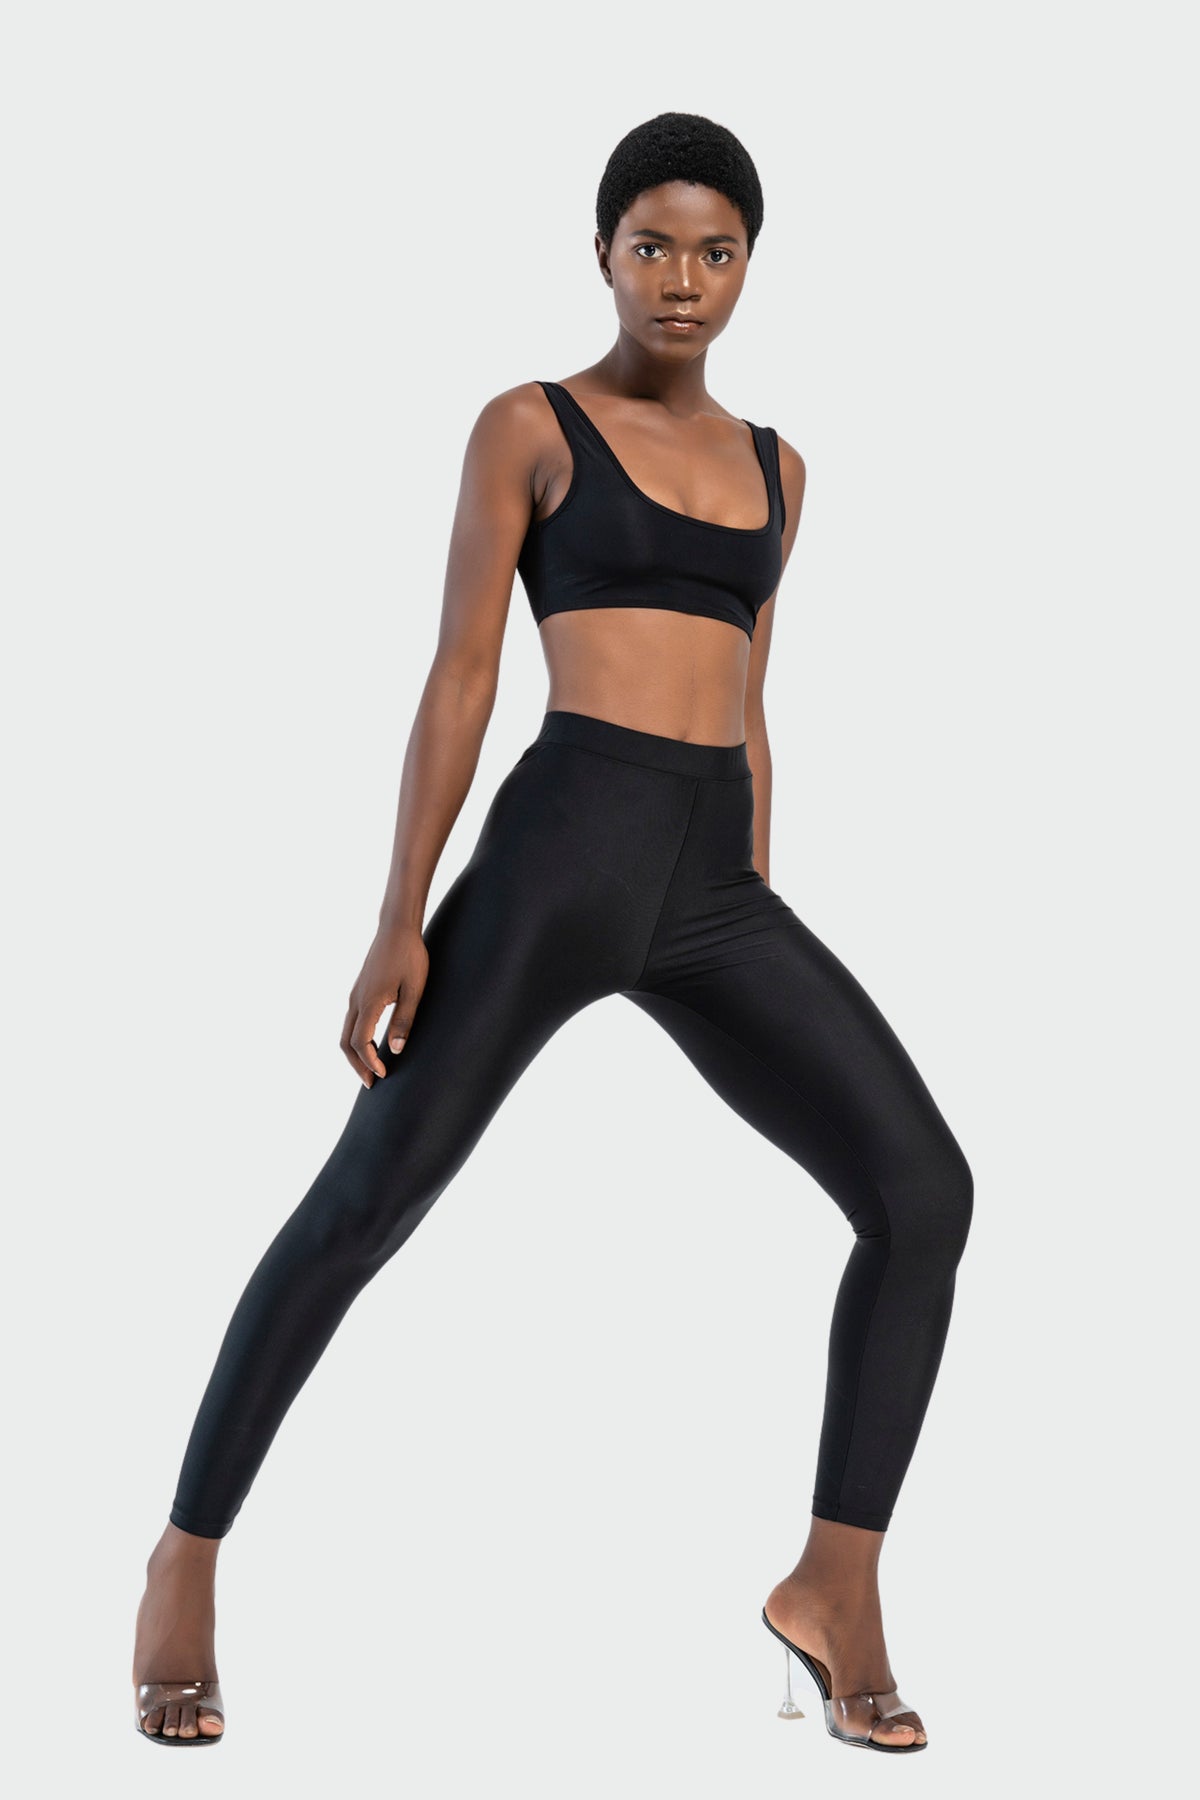 Shiny Black Footed Spandex Leggings. Material: 80% Nylon 20% Lycra. £20.99  | Spandex leggings, Lycra spandex, Shiny leotard